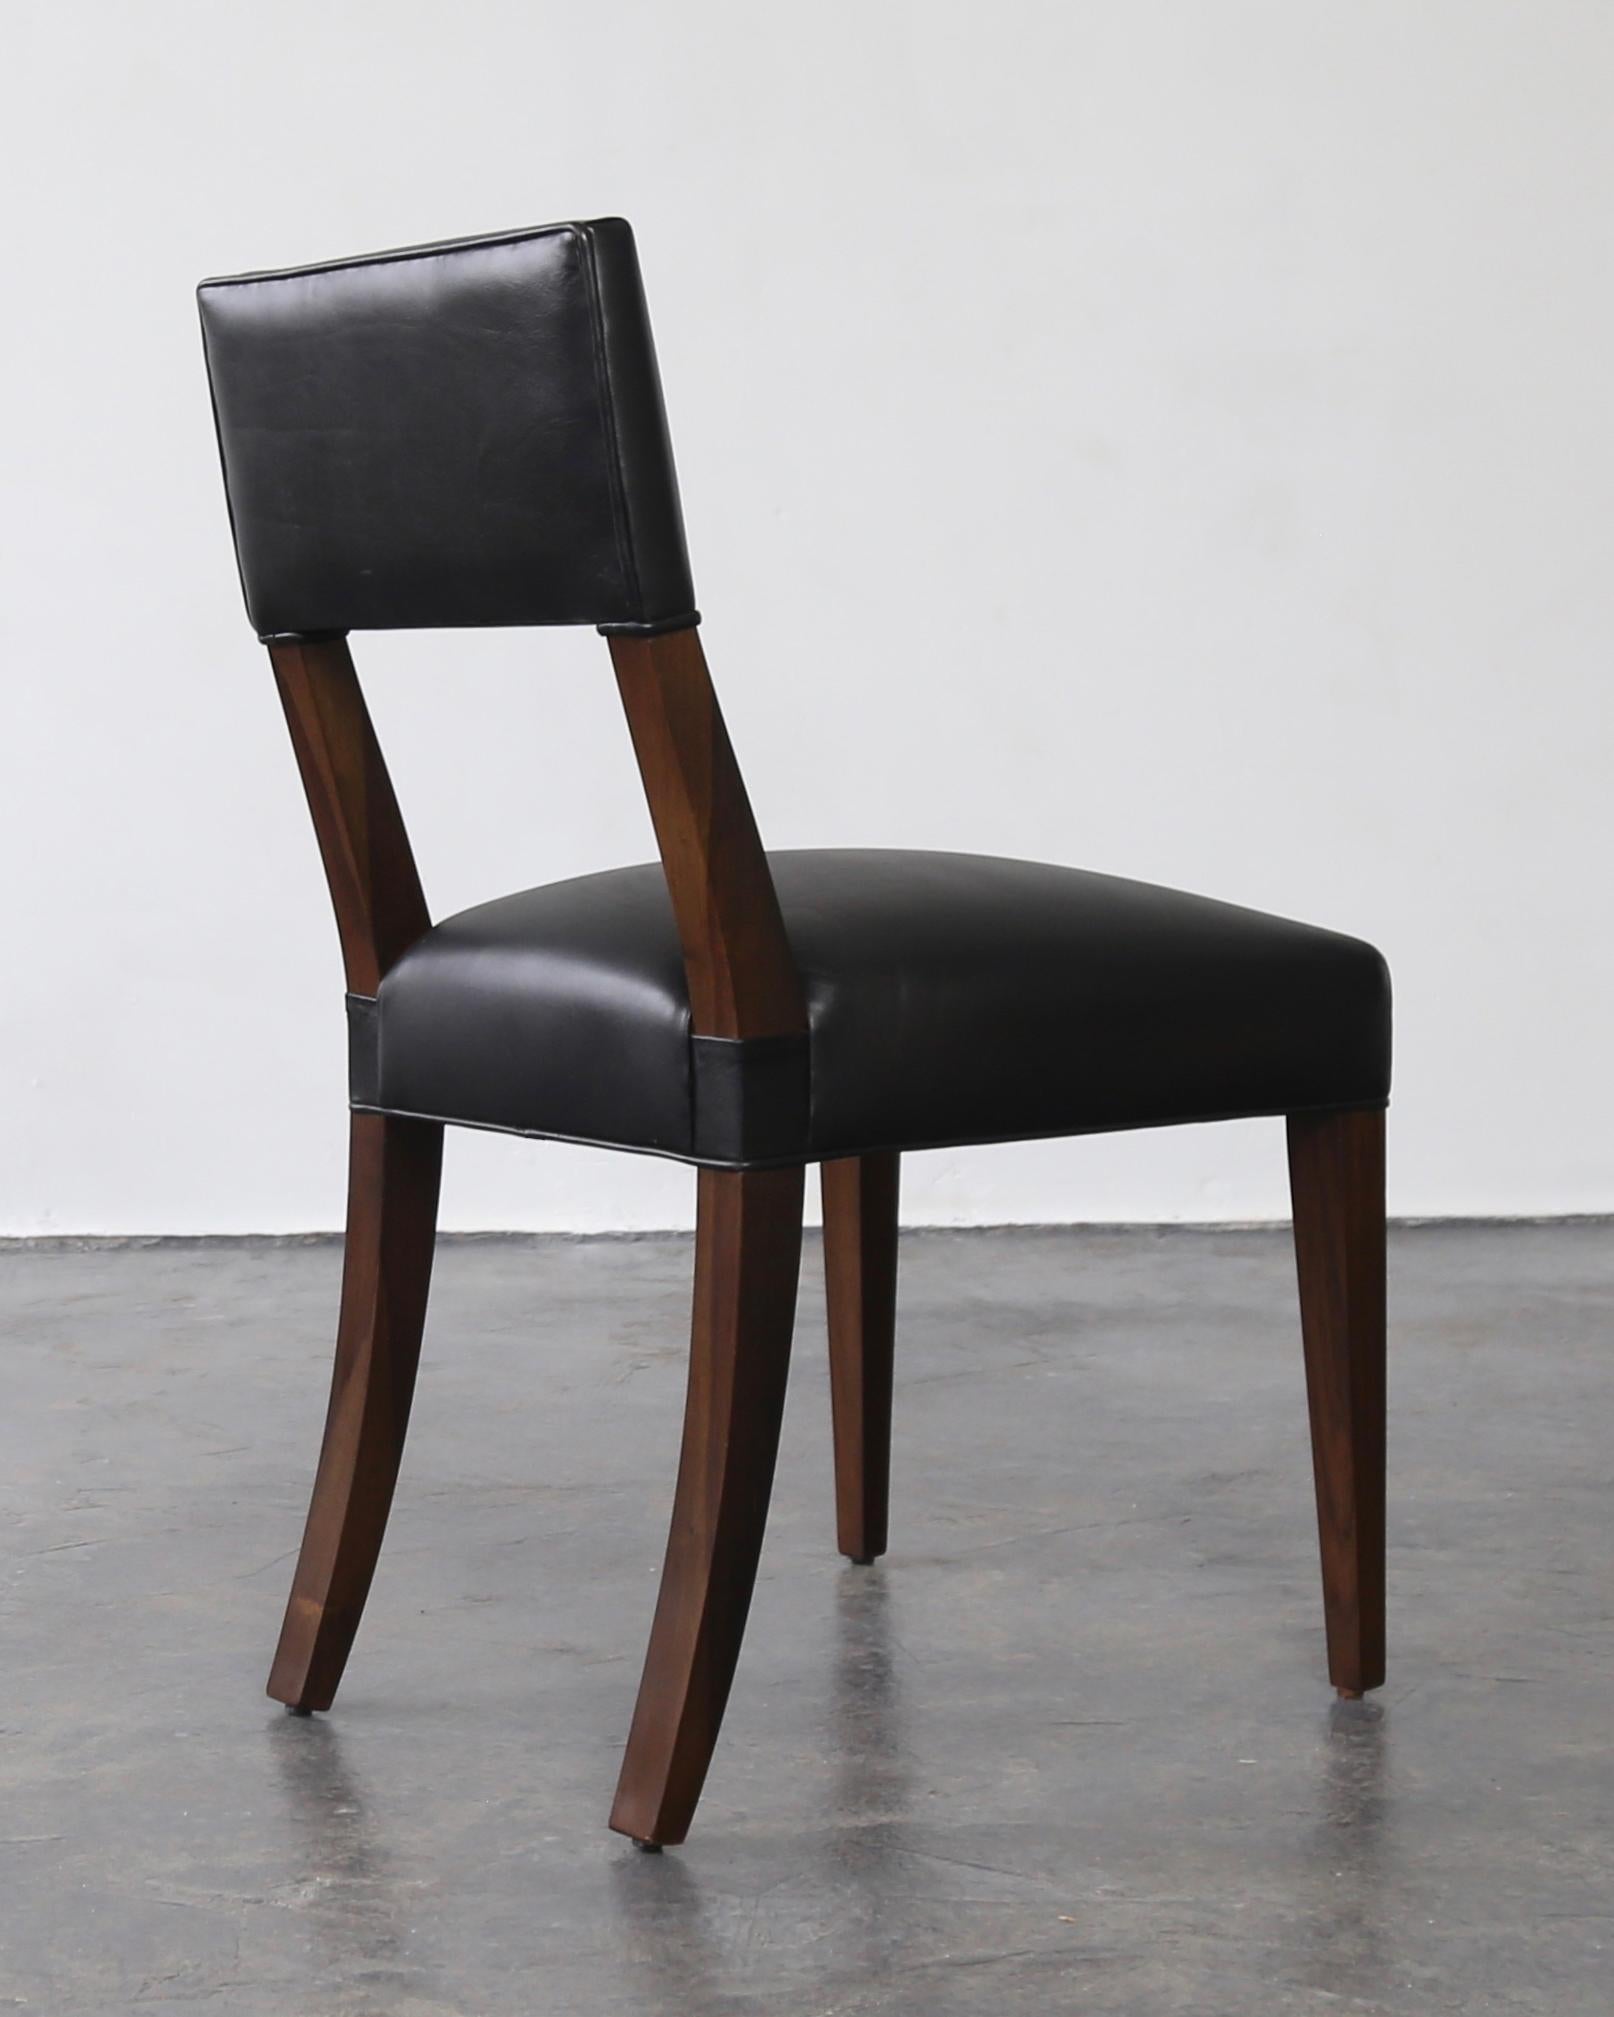 Costantini prides itself in using the hardest and most beautiful hardwoods in the construction of its line of seating. The Neto Chair has a gently curved back leg, with sleek, straight front legs and stretchers. Available as shown or made to order,